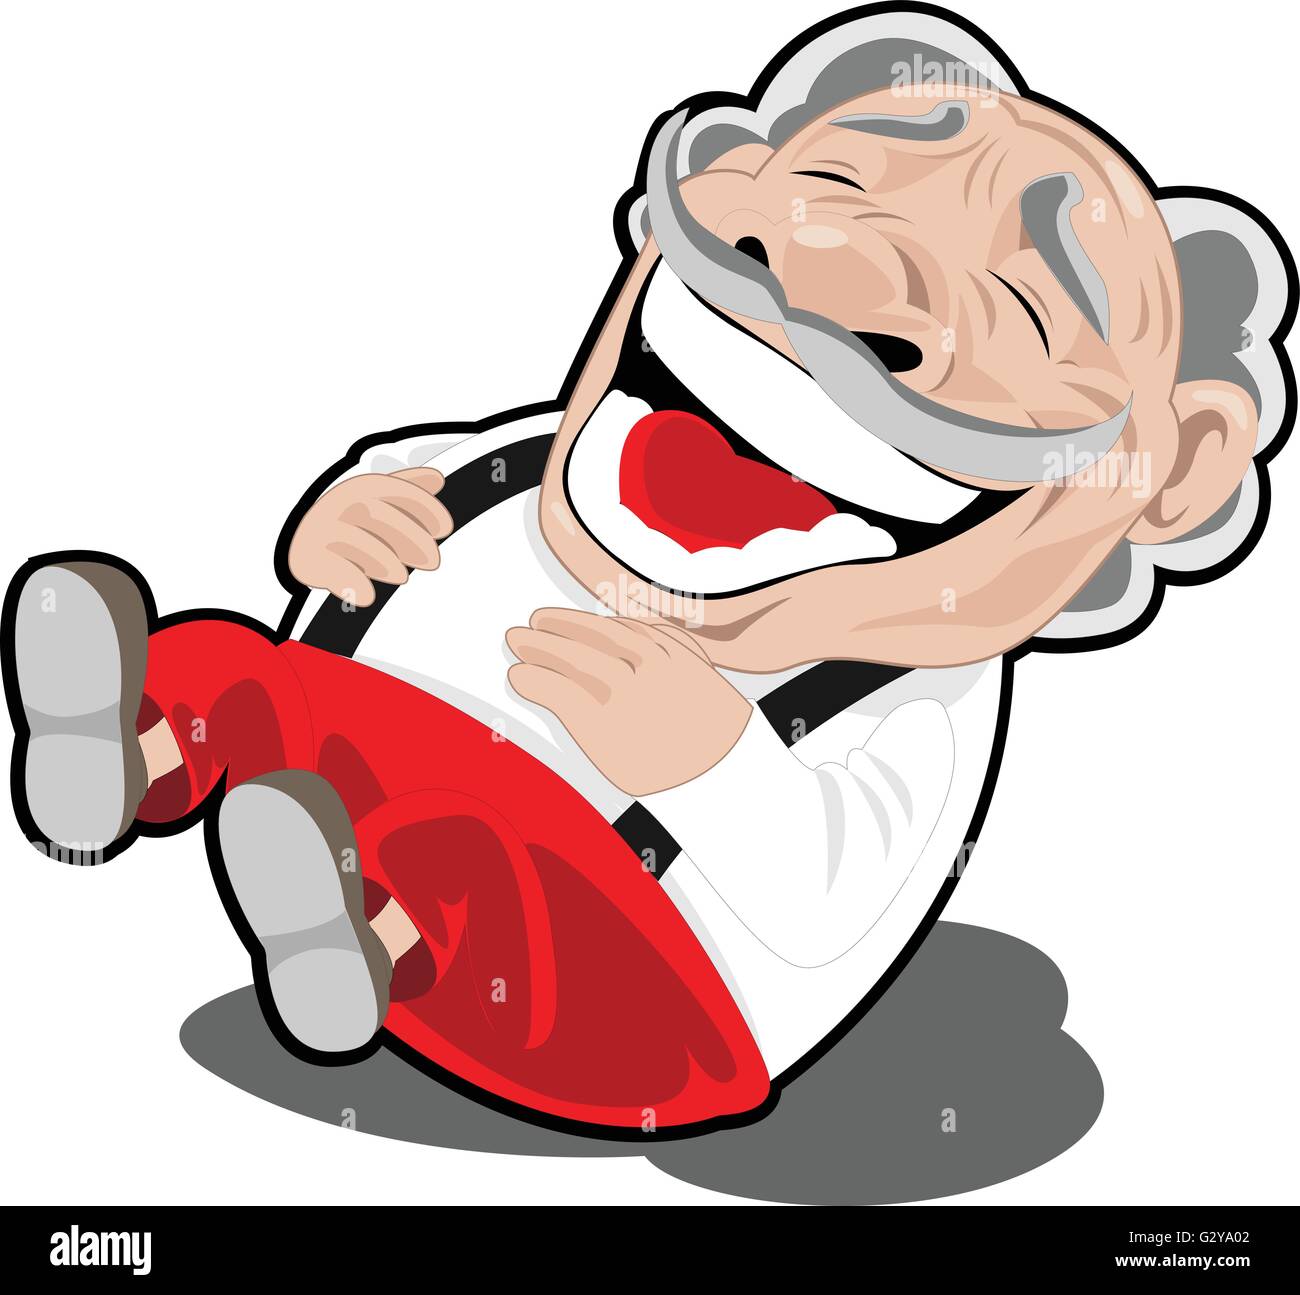 laughing person cartoon